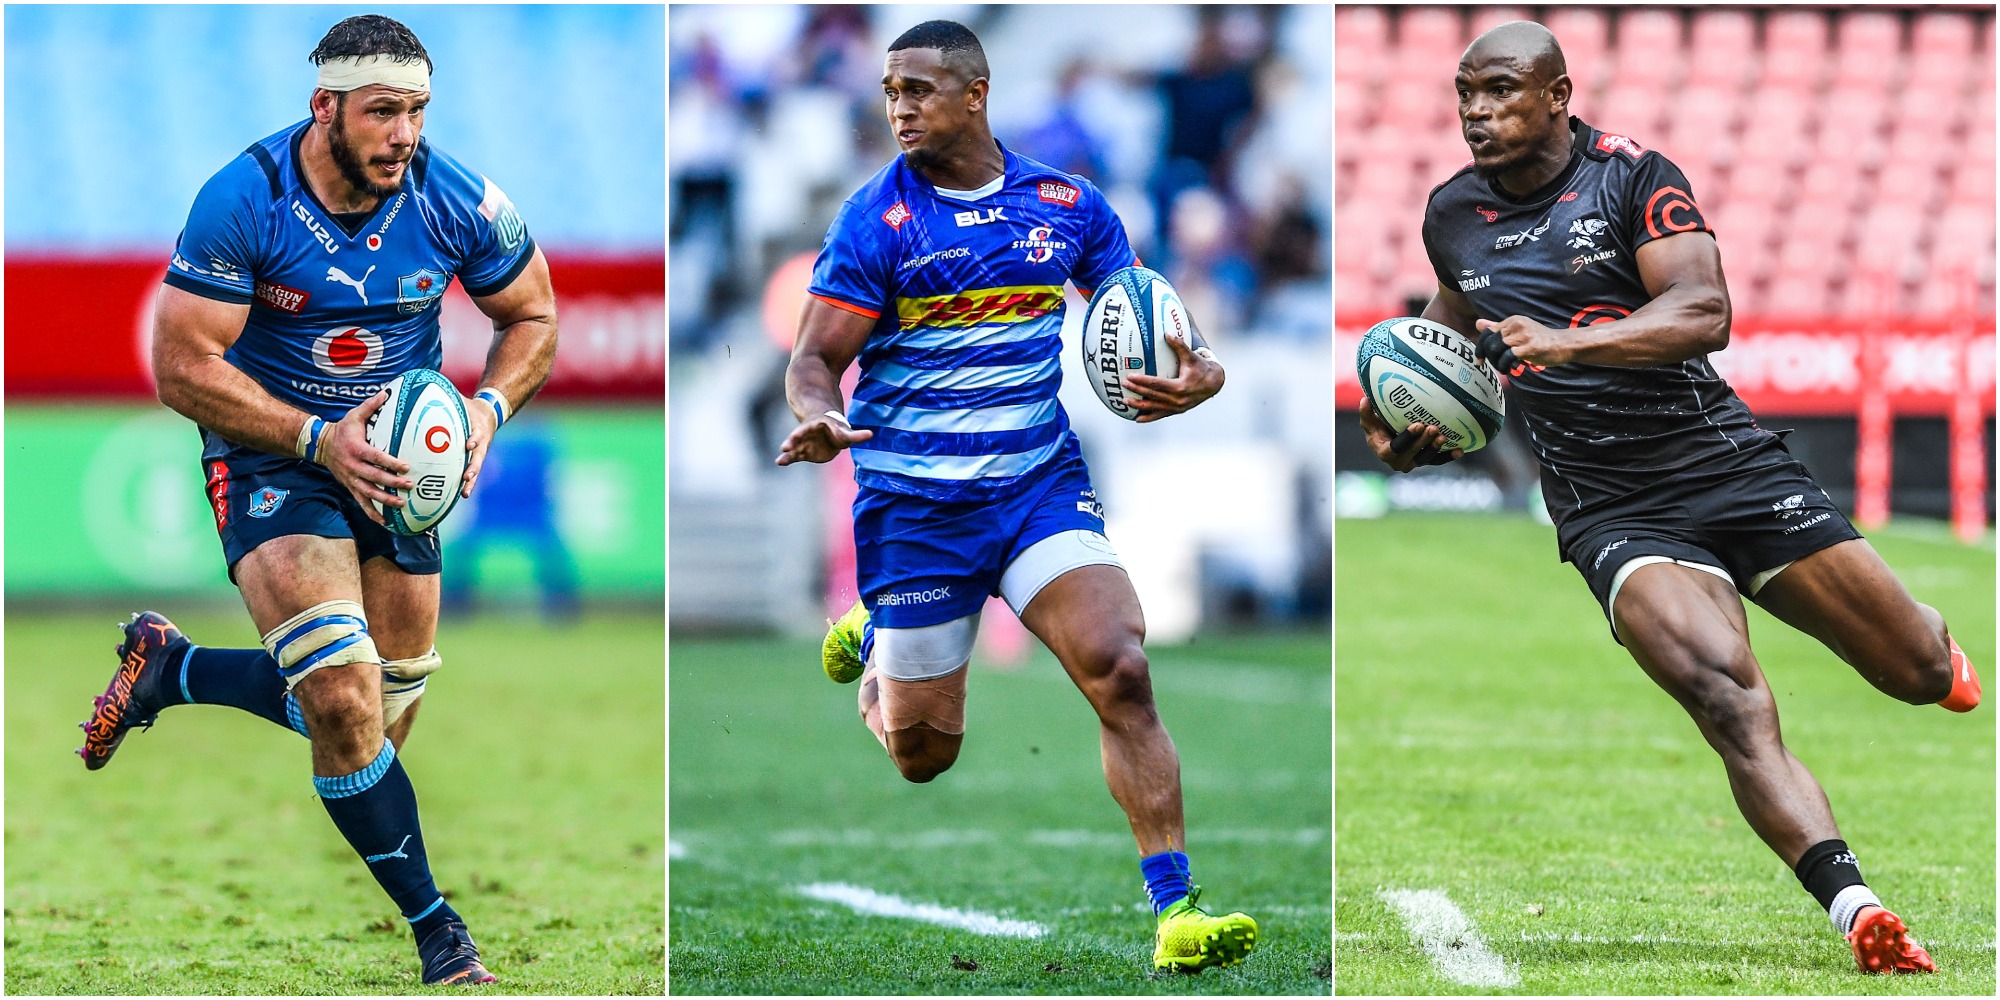 Marcell Coetzee, Leolin Zas and Makazole Mapimpi were their teams' top try scorers in the Vodacom URC this season.